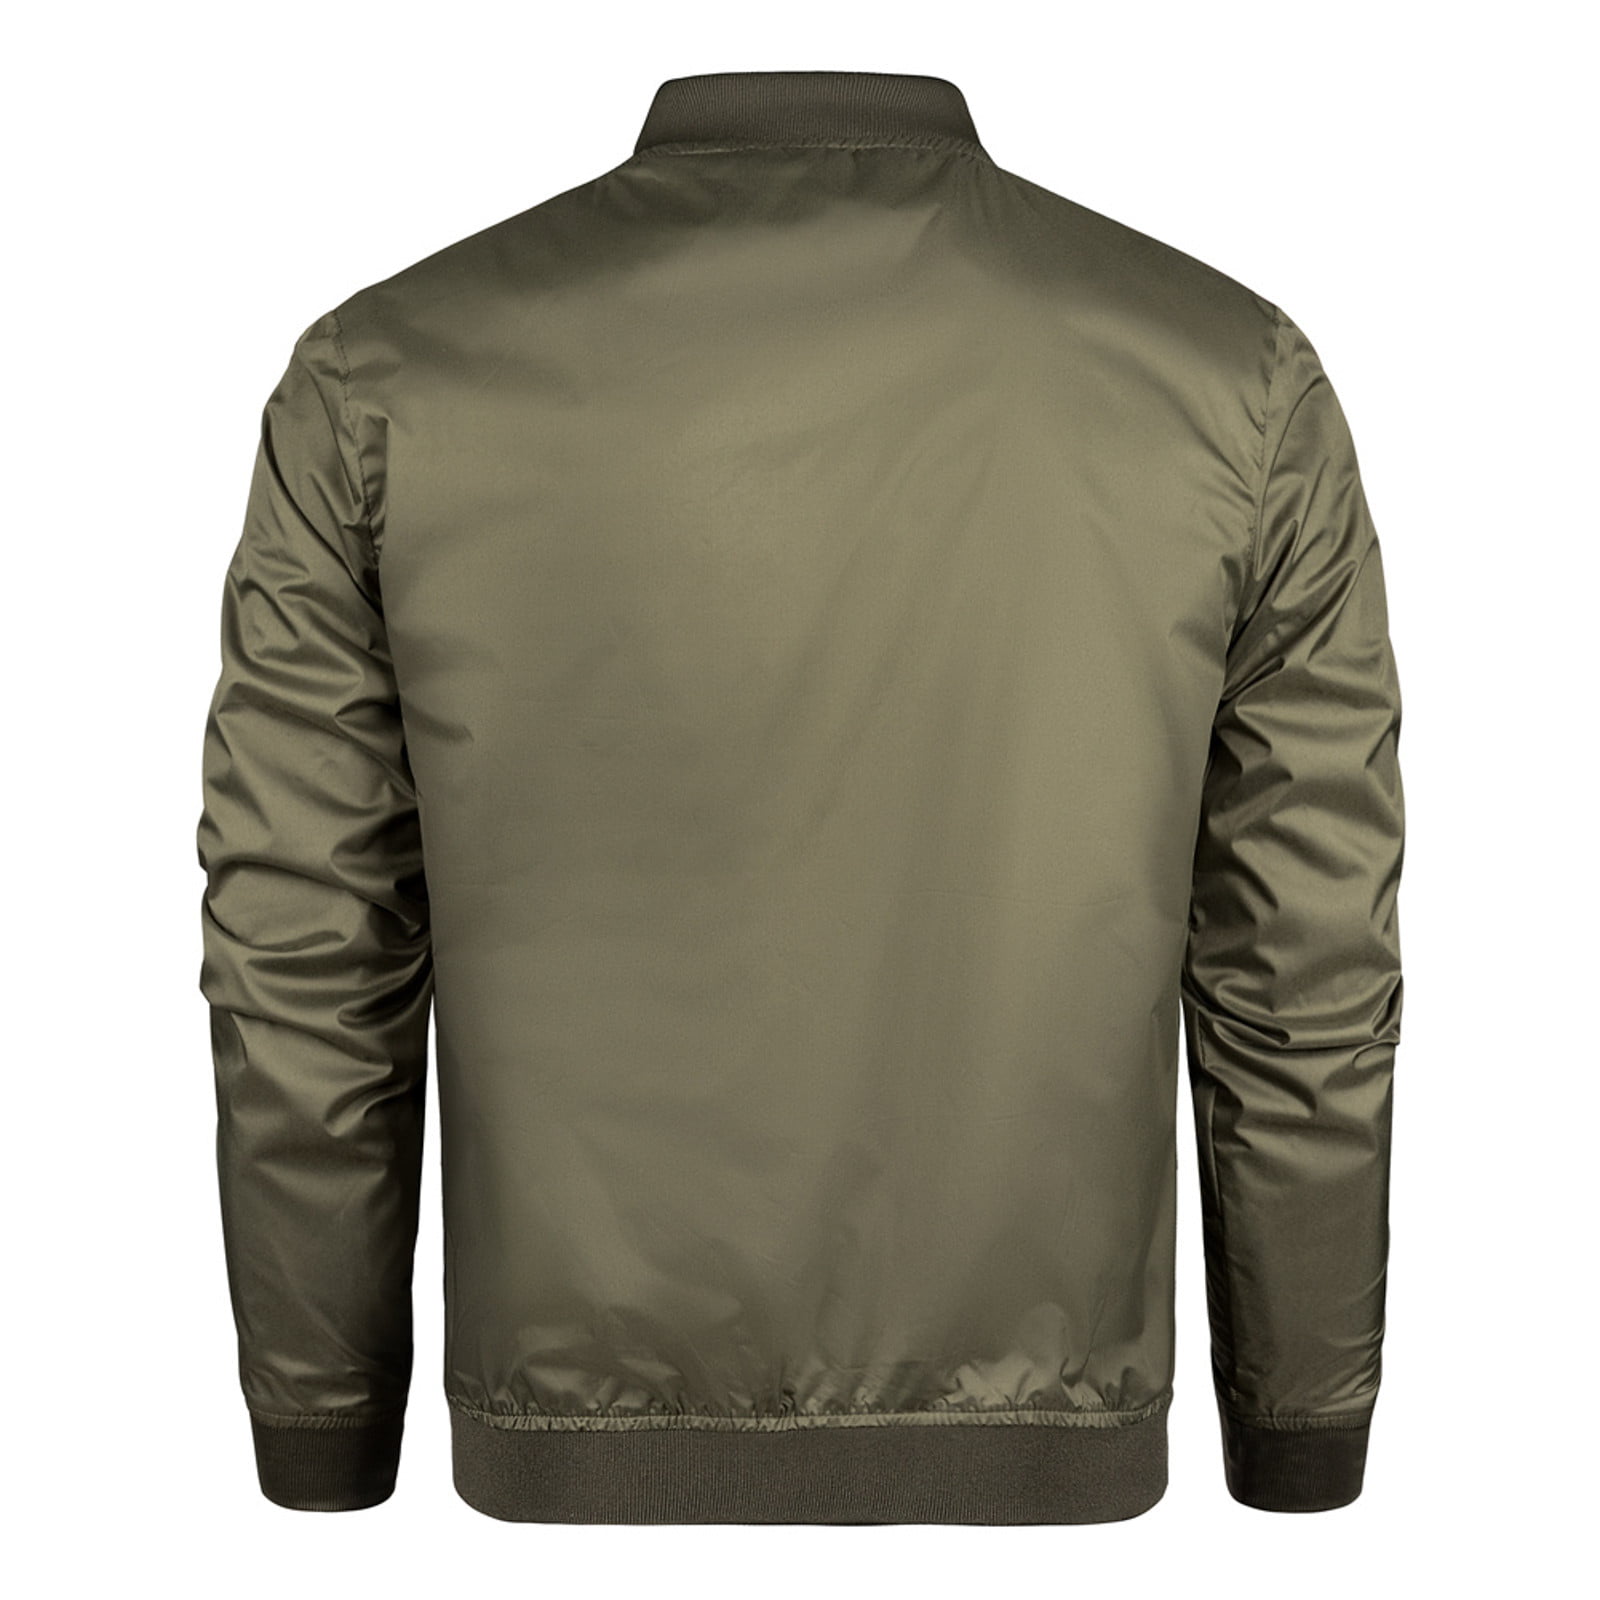 Fashionable woodland leather jackets For Comfort And Style - Alibaba.com-thanhphatduhoc.com.vn